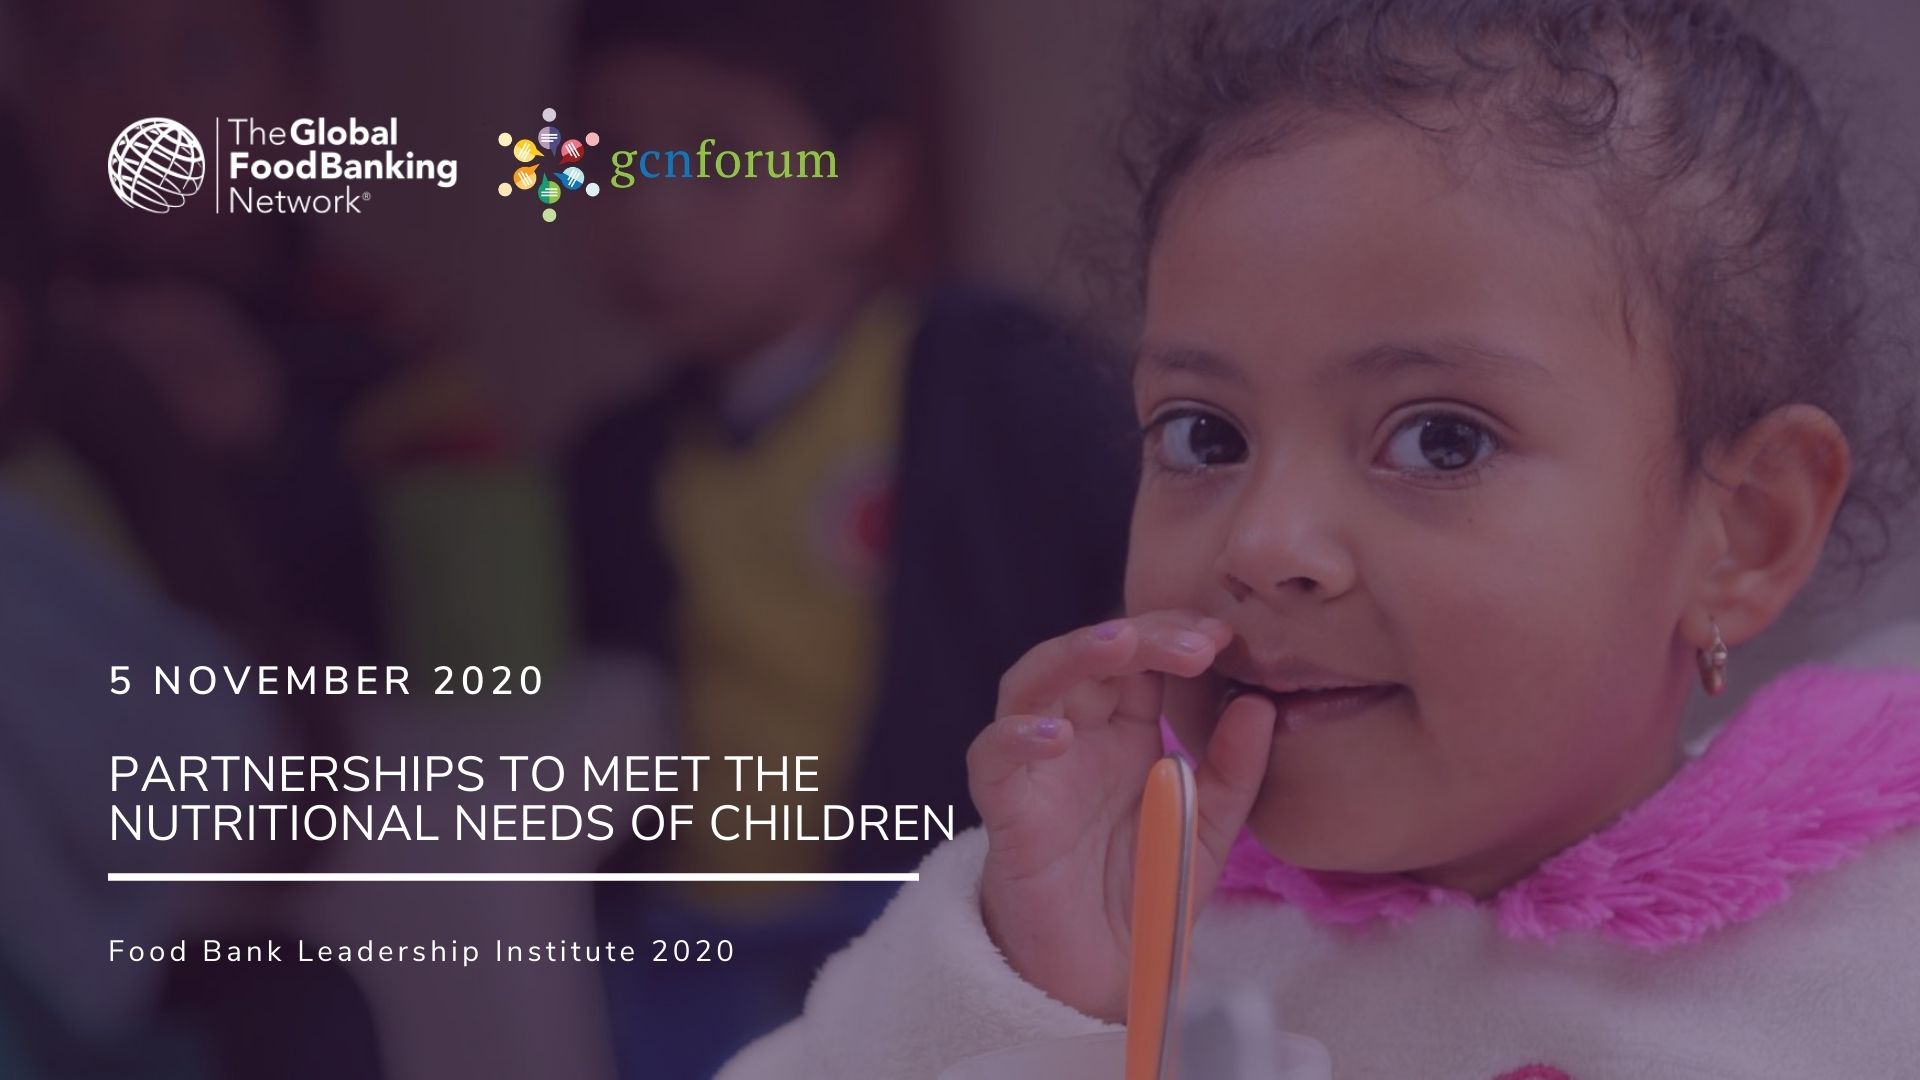 Partnerships to Meet the Nutritional Needs of Children